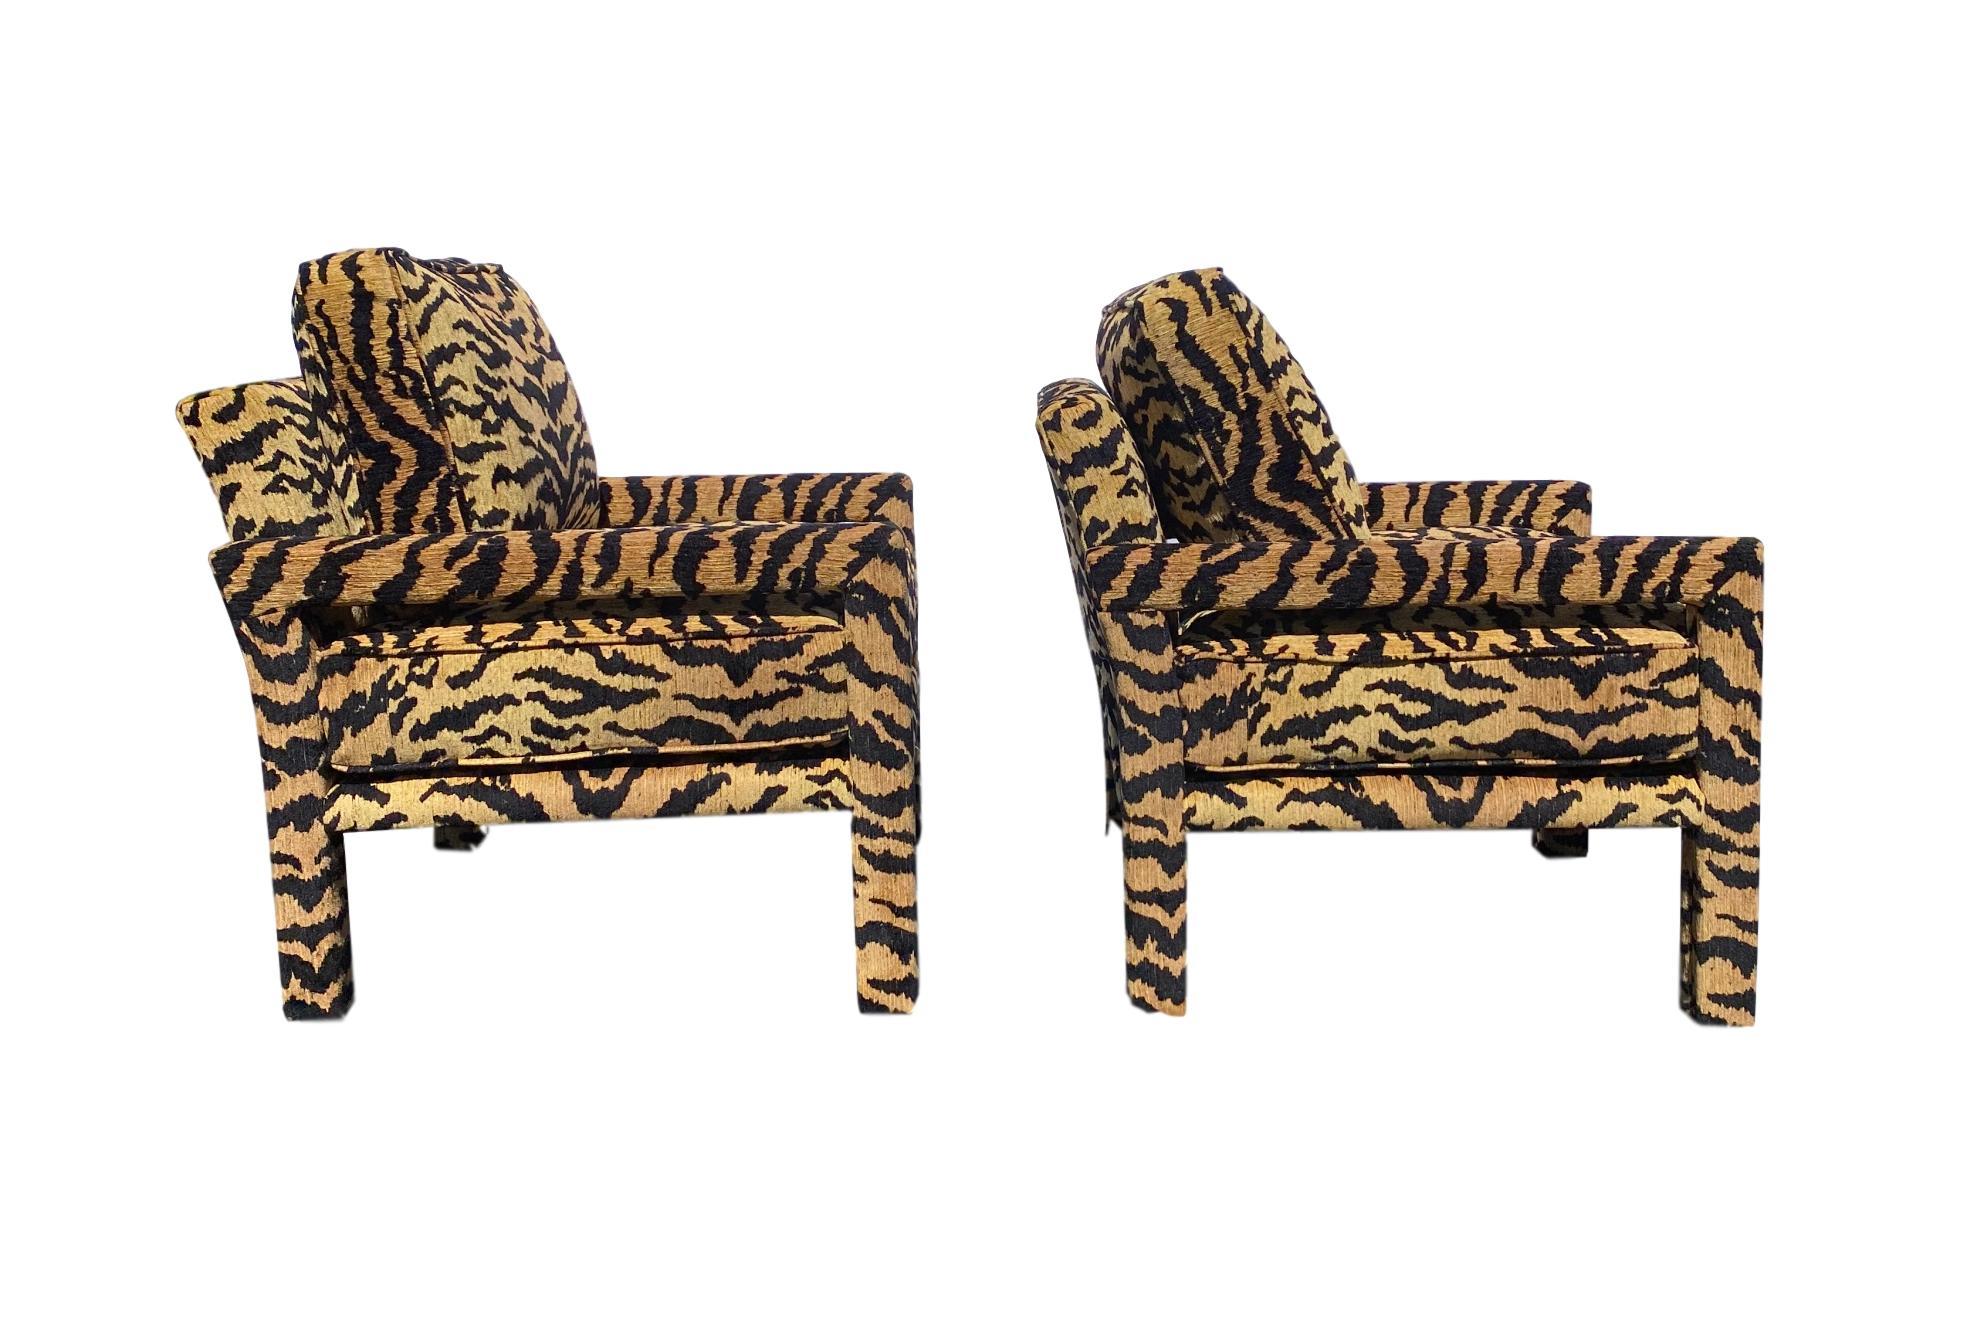 Pair of New Milo Baughman style parsons chairs upholstered in high-end designer tiger fabric, woven, heavy cut and uncut chenille; the hand of the fabric is unexpectedly soft and luxurious. Our chairs are handcrafted and upholstered from new